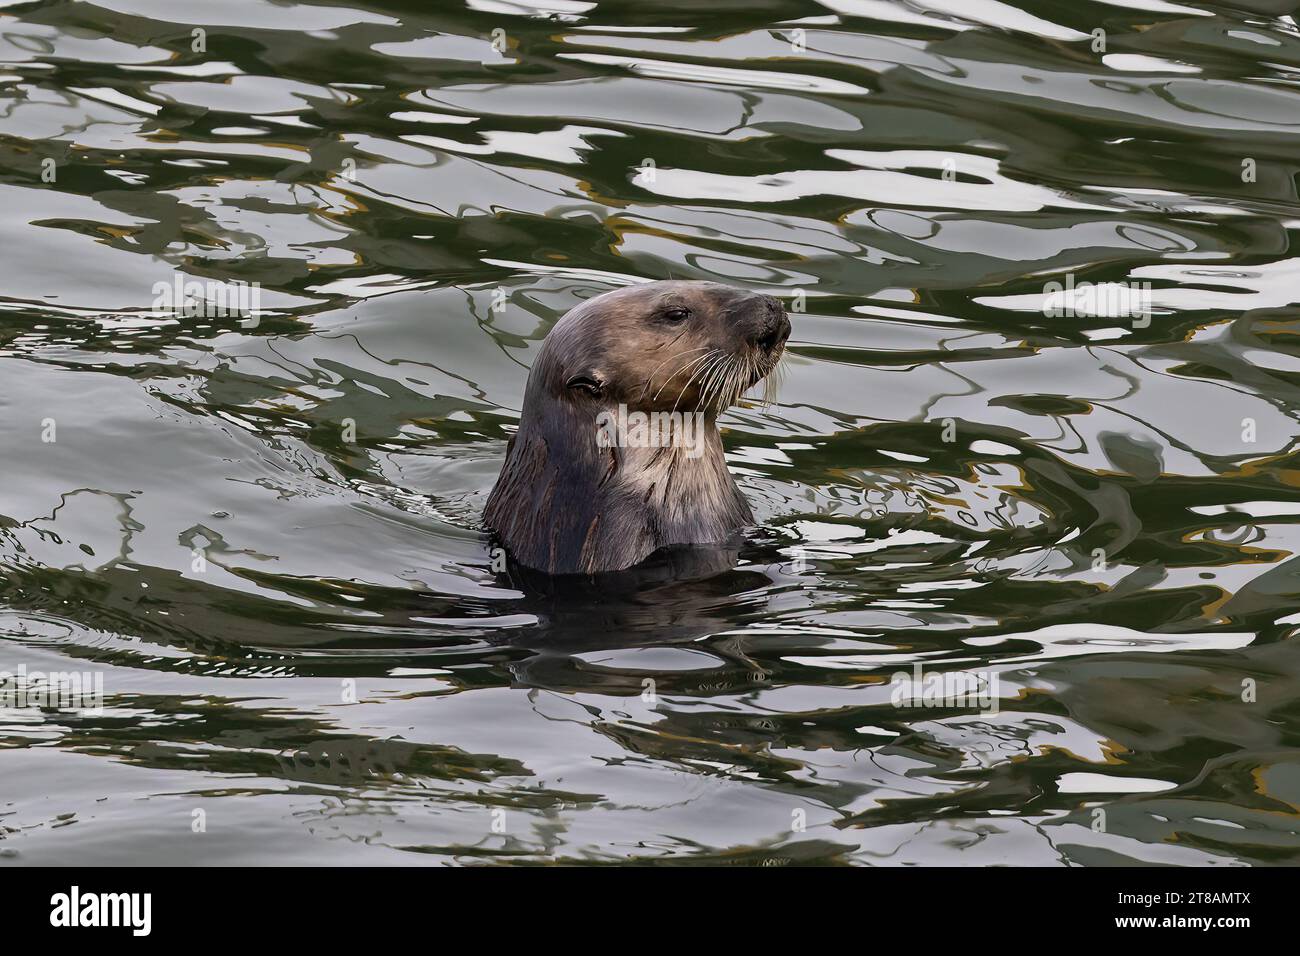 Sea otter (Enhydra lutris) in Morro Bay, California. Head visible above the water. Stock Photo